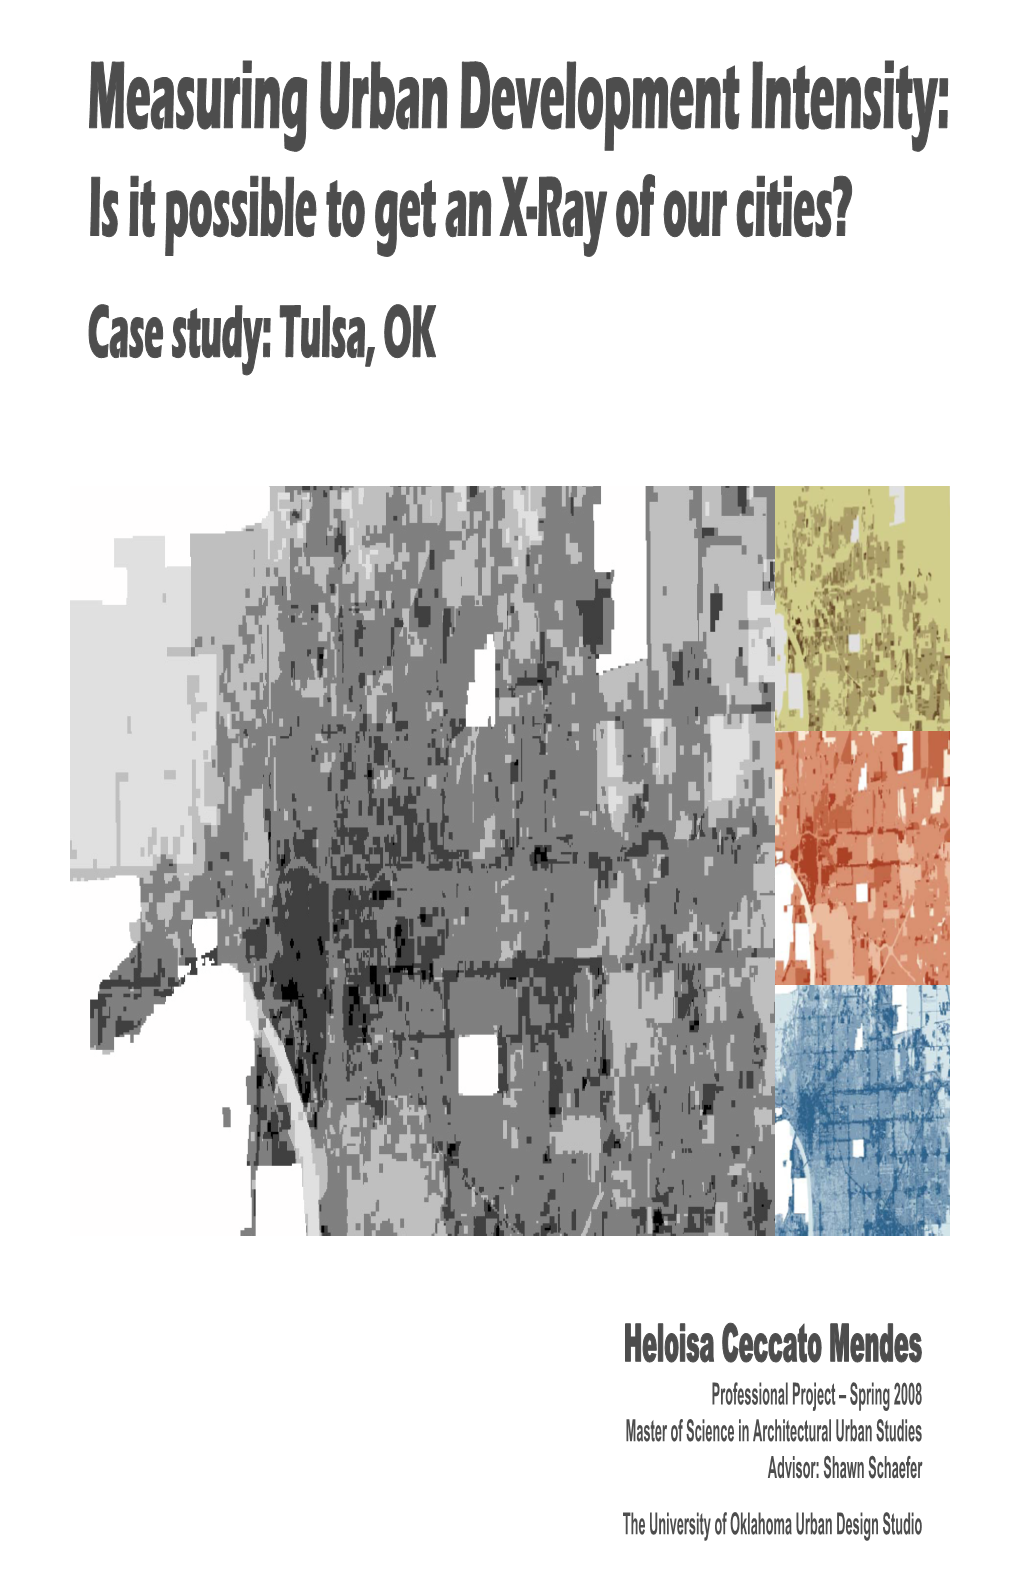 Measuring Urban Development Intensity: Is It Possible to Get an X-Ray of Our Cities? Case Study: Tulsa, OK